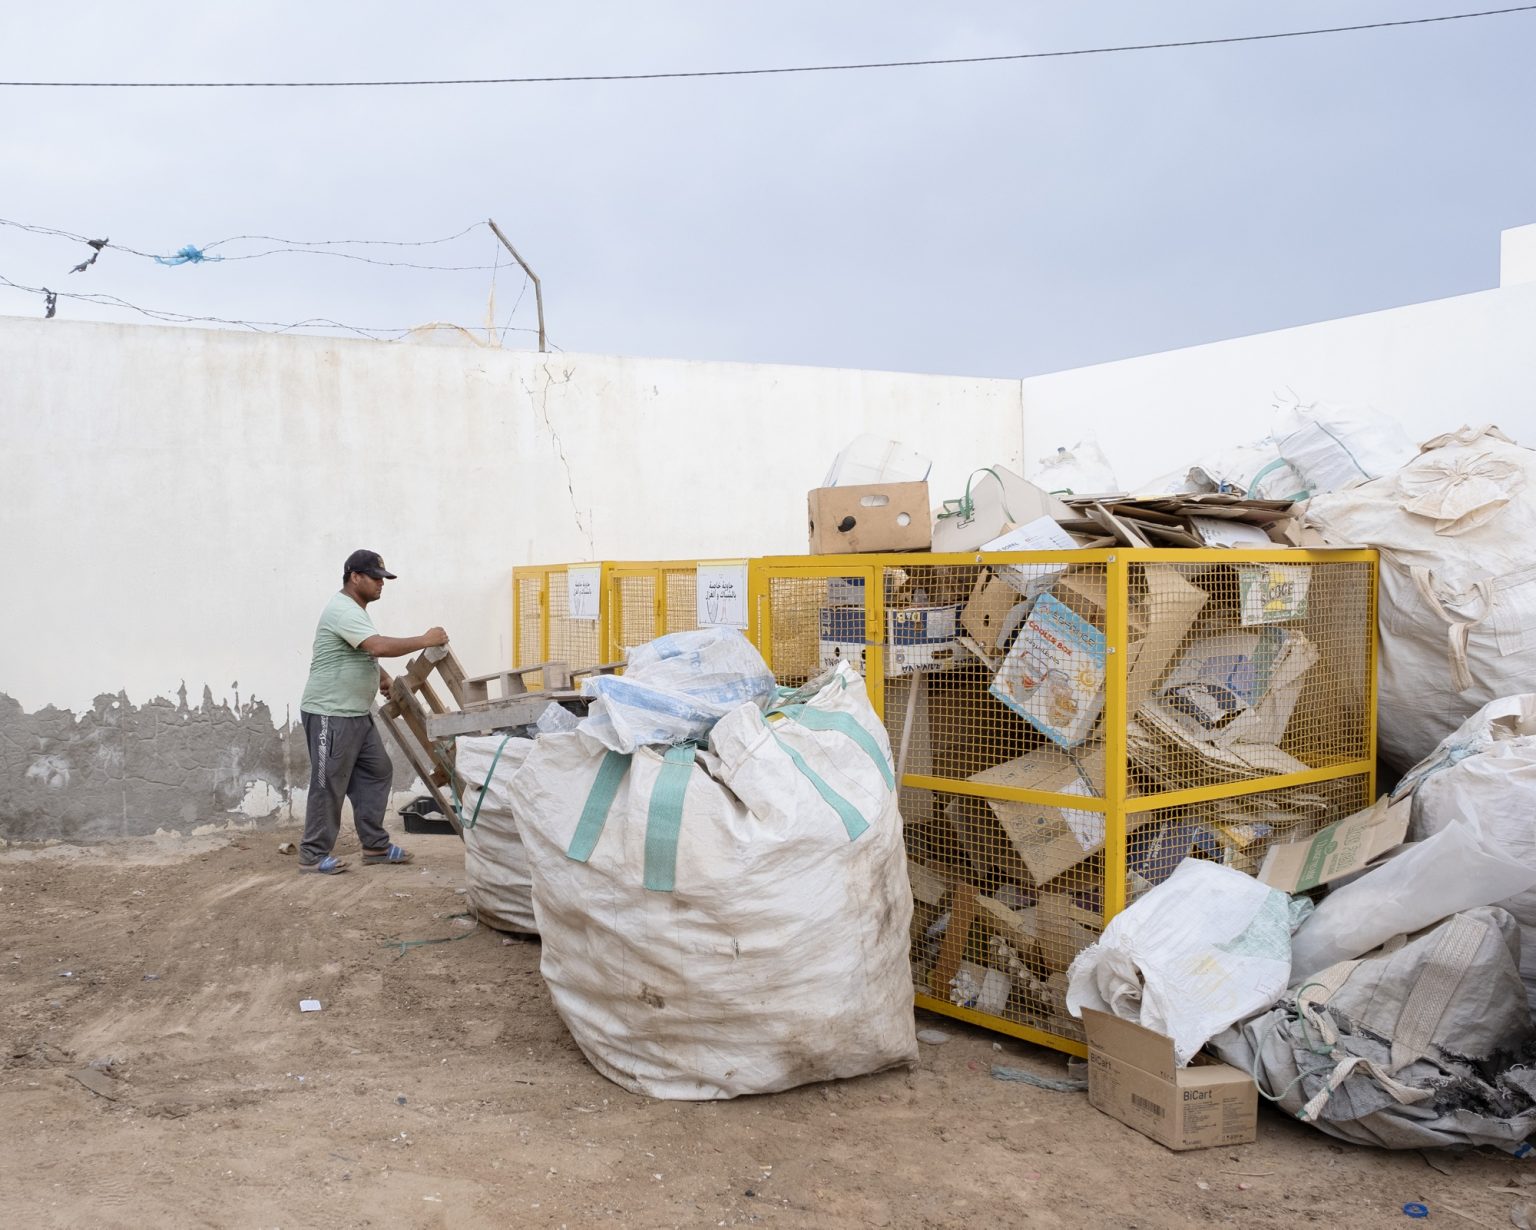 Kerkennah Islands (Tunisia), June 2022 - Plastic recycling factory. Plastic waste represents a big problem for the island's ecosystem. Born in 2014, Kerkenna Plastic is committed to tackling the problem through a system of collectors that recover the plastic and take it to the recycling center, where it is pressed and prepared to be sold to Spain. In 2021, 92 tons of plastic were collected. Collectors are paid 800 millim per kg and on average each collector can collect about 50 kg per day.
><
Isole Kerkennah (Tunisia), giugno 2022 - Fabbrica di riciclaggio della plastica. I rifiuti in plastica rappresentano un grande problema per lecosistema dellisola. Nata nel 2014, Kerkenna Plastic, si impegna a far fronte al problema attraverso un sistema di raccoglitori che recuperano la plastica e la portano al centro di riciclaggio, dove viene pressata e preparata per essere venduta alla Spagna. Nel 2021 sono state collezionate 92 tonnellate di plastica. Ai raccoglitori viene pagata 800 millim al kg e di media ogni raccoglitore può arrivare a raccoglierne circa 50 kg al giorno.